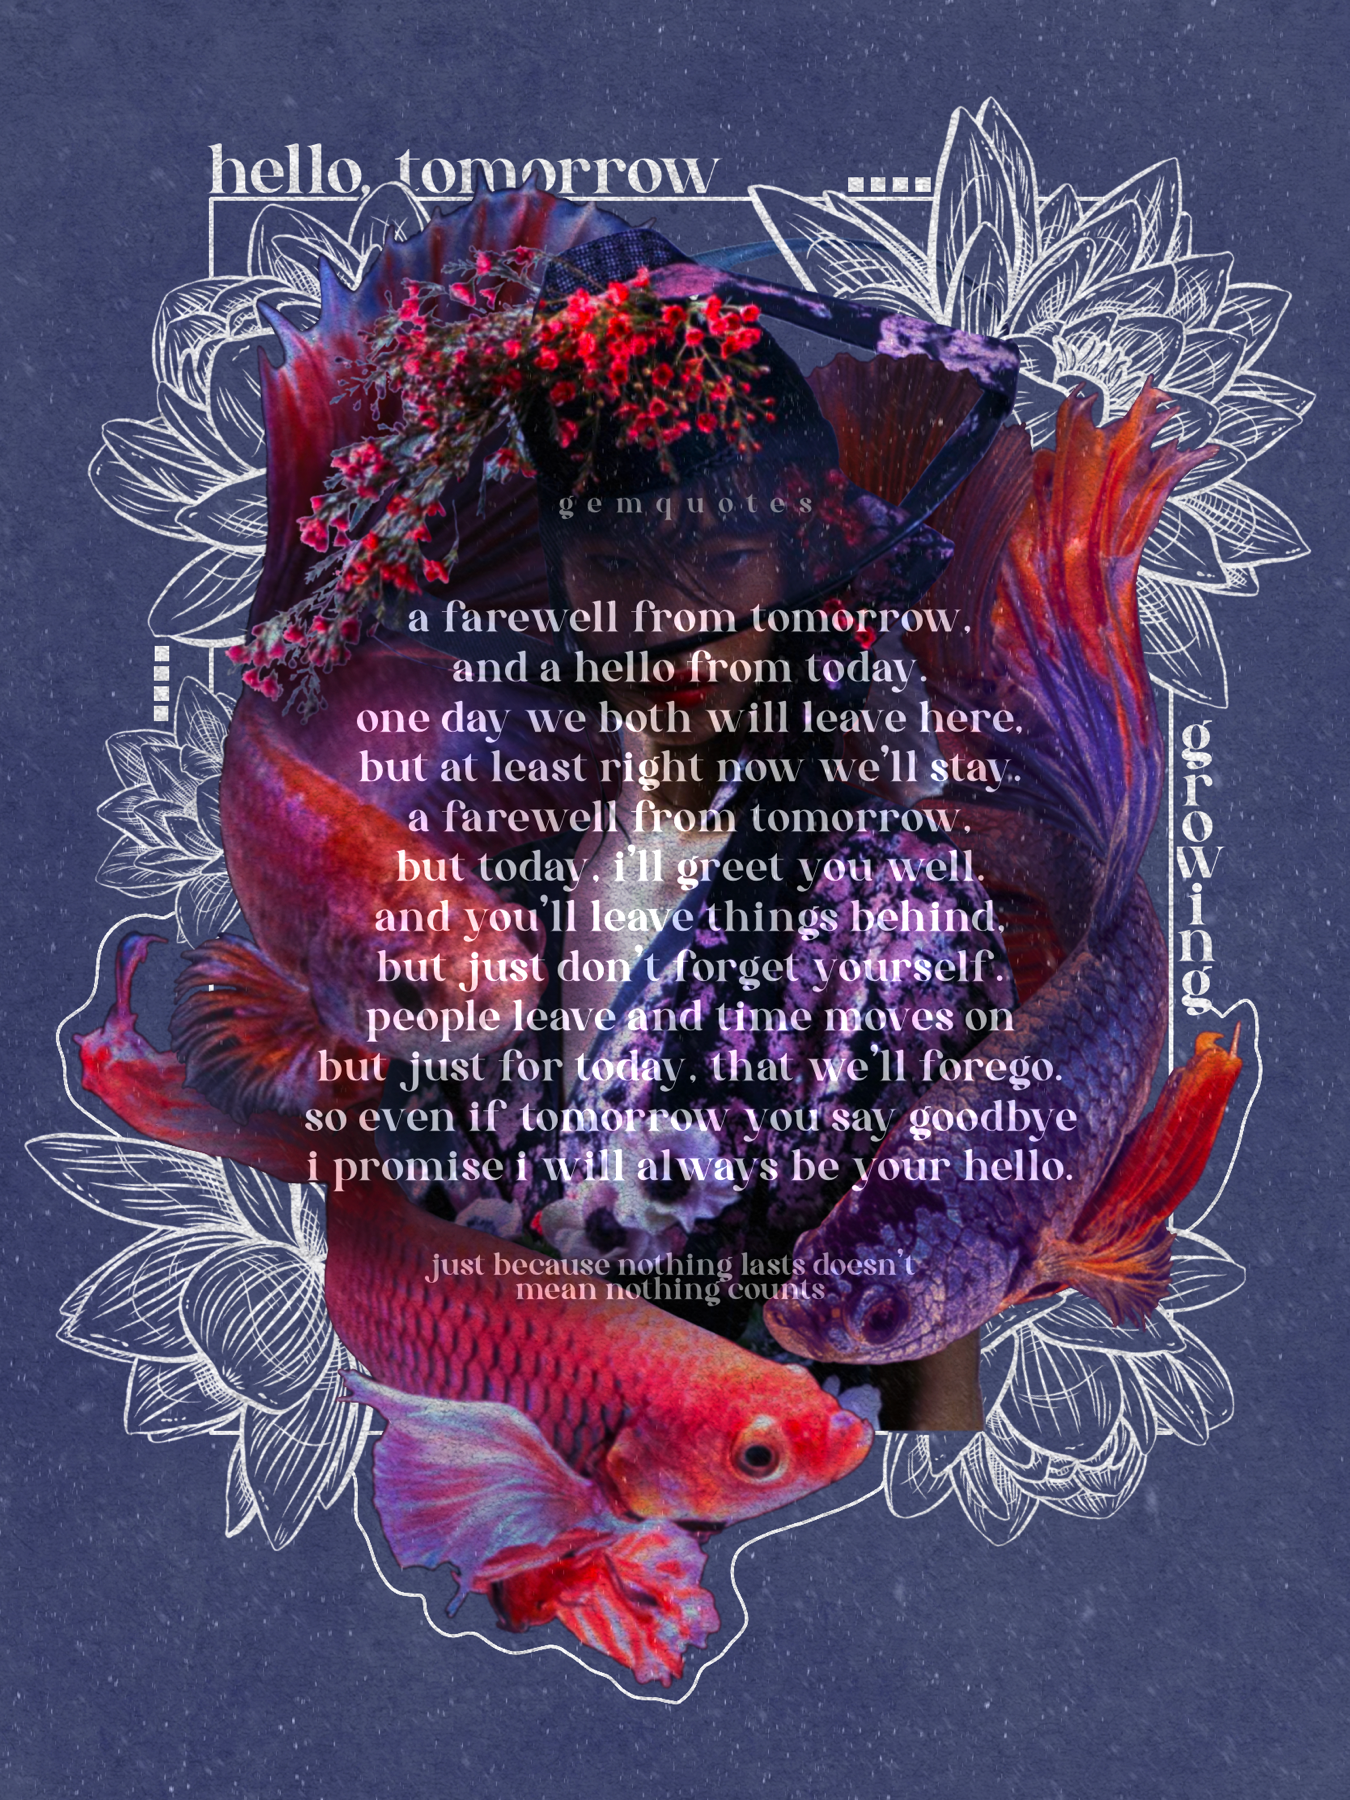 “XtapX”
Poem by me :) i know people leave, both here on PC and just in life, but i hope u all aren’t too discouraged by it. I hope you know moving on and growing forward is okay. New chapters aren’t so bad :) ~💗